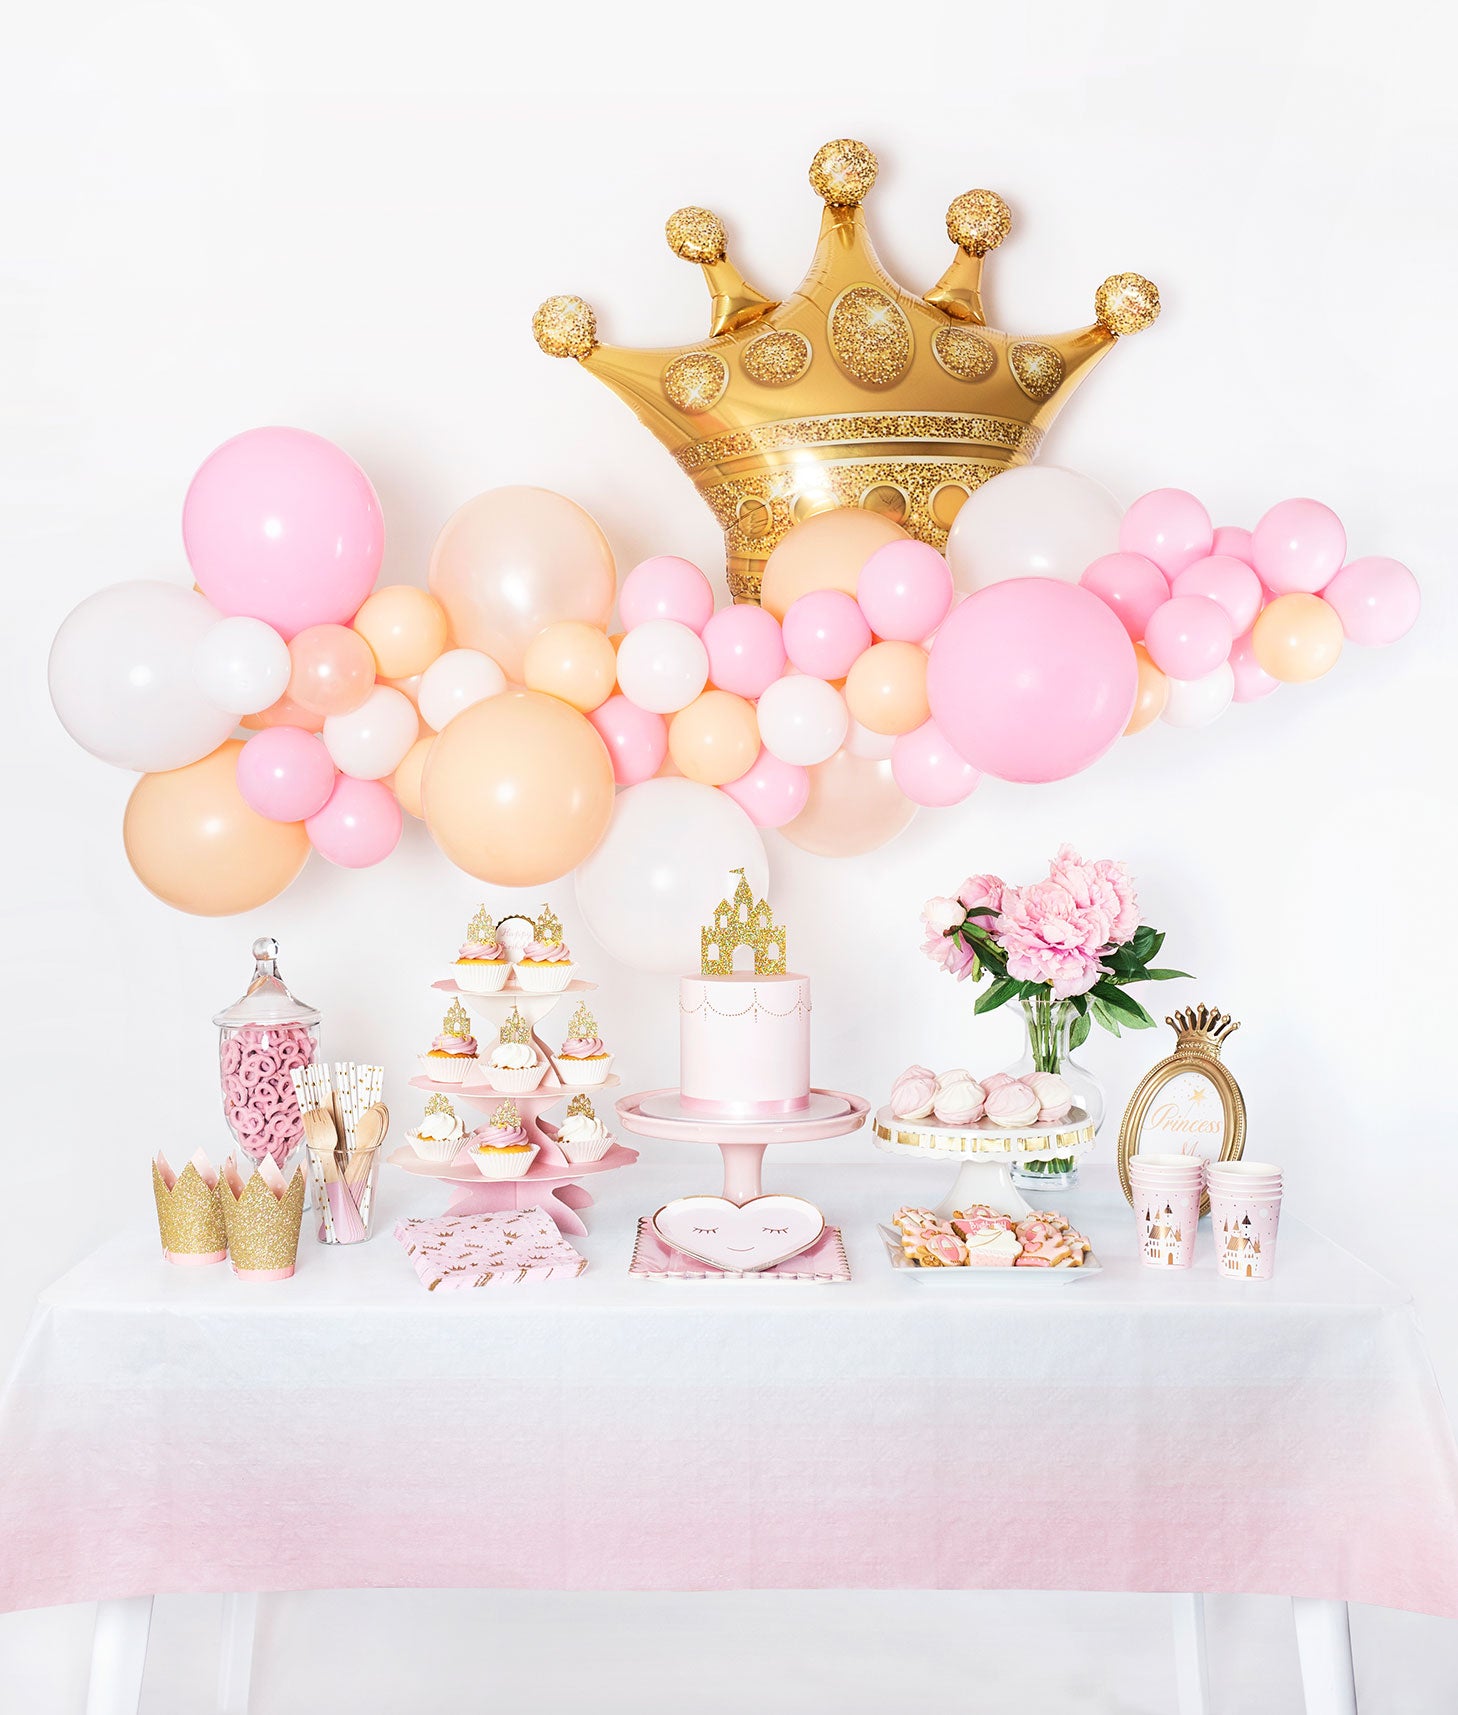 Pink and Gold Princess Themed Birthday Party Decoration Inspriation 